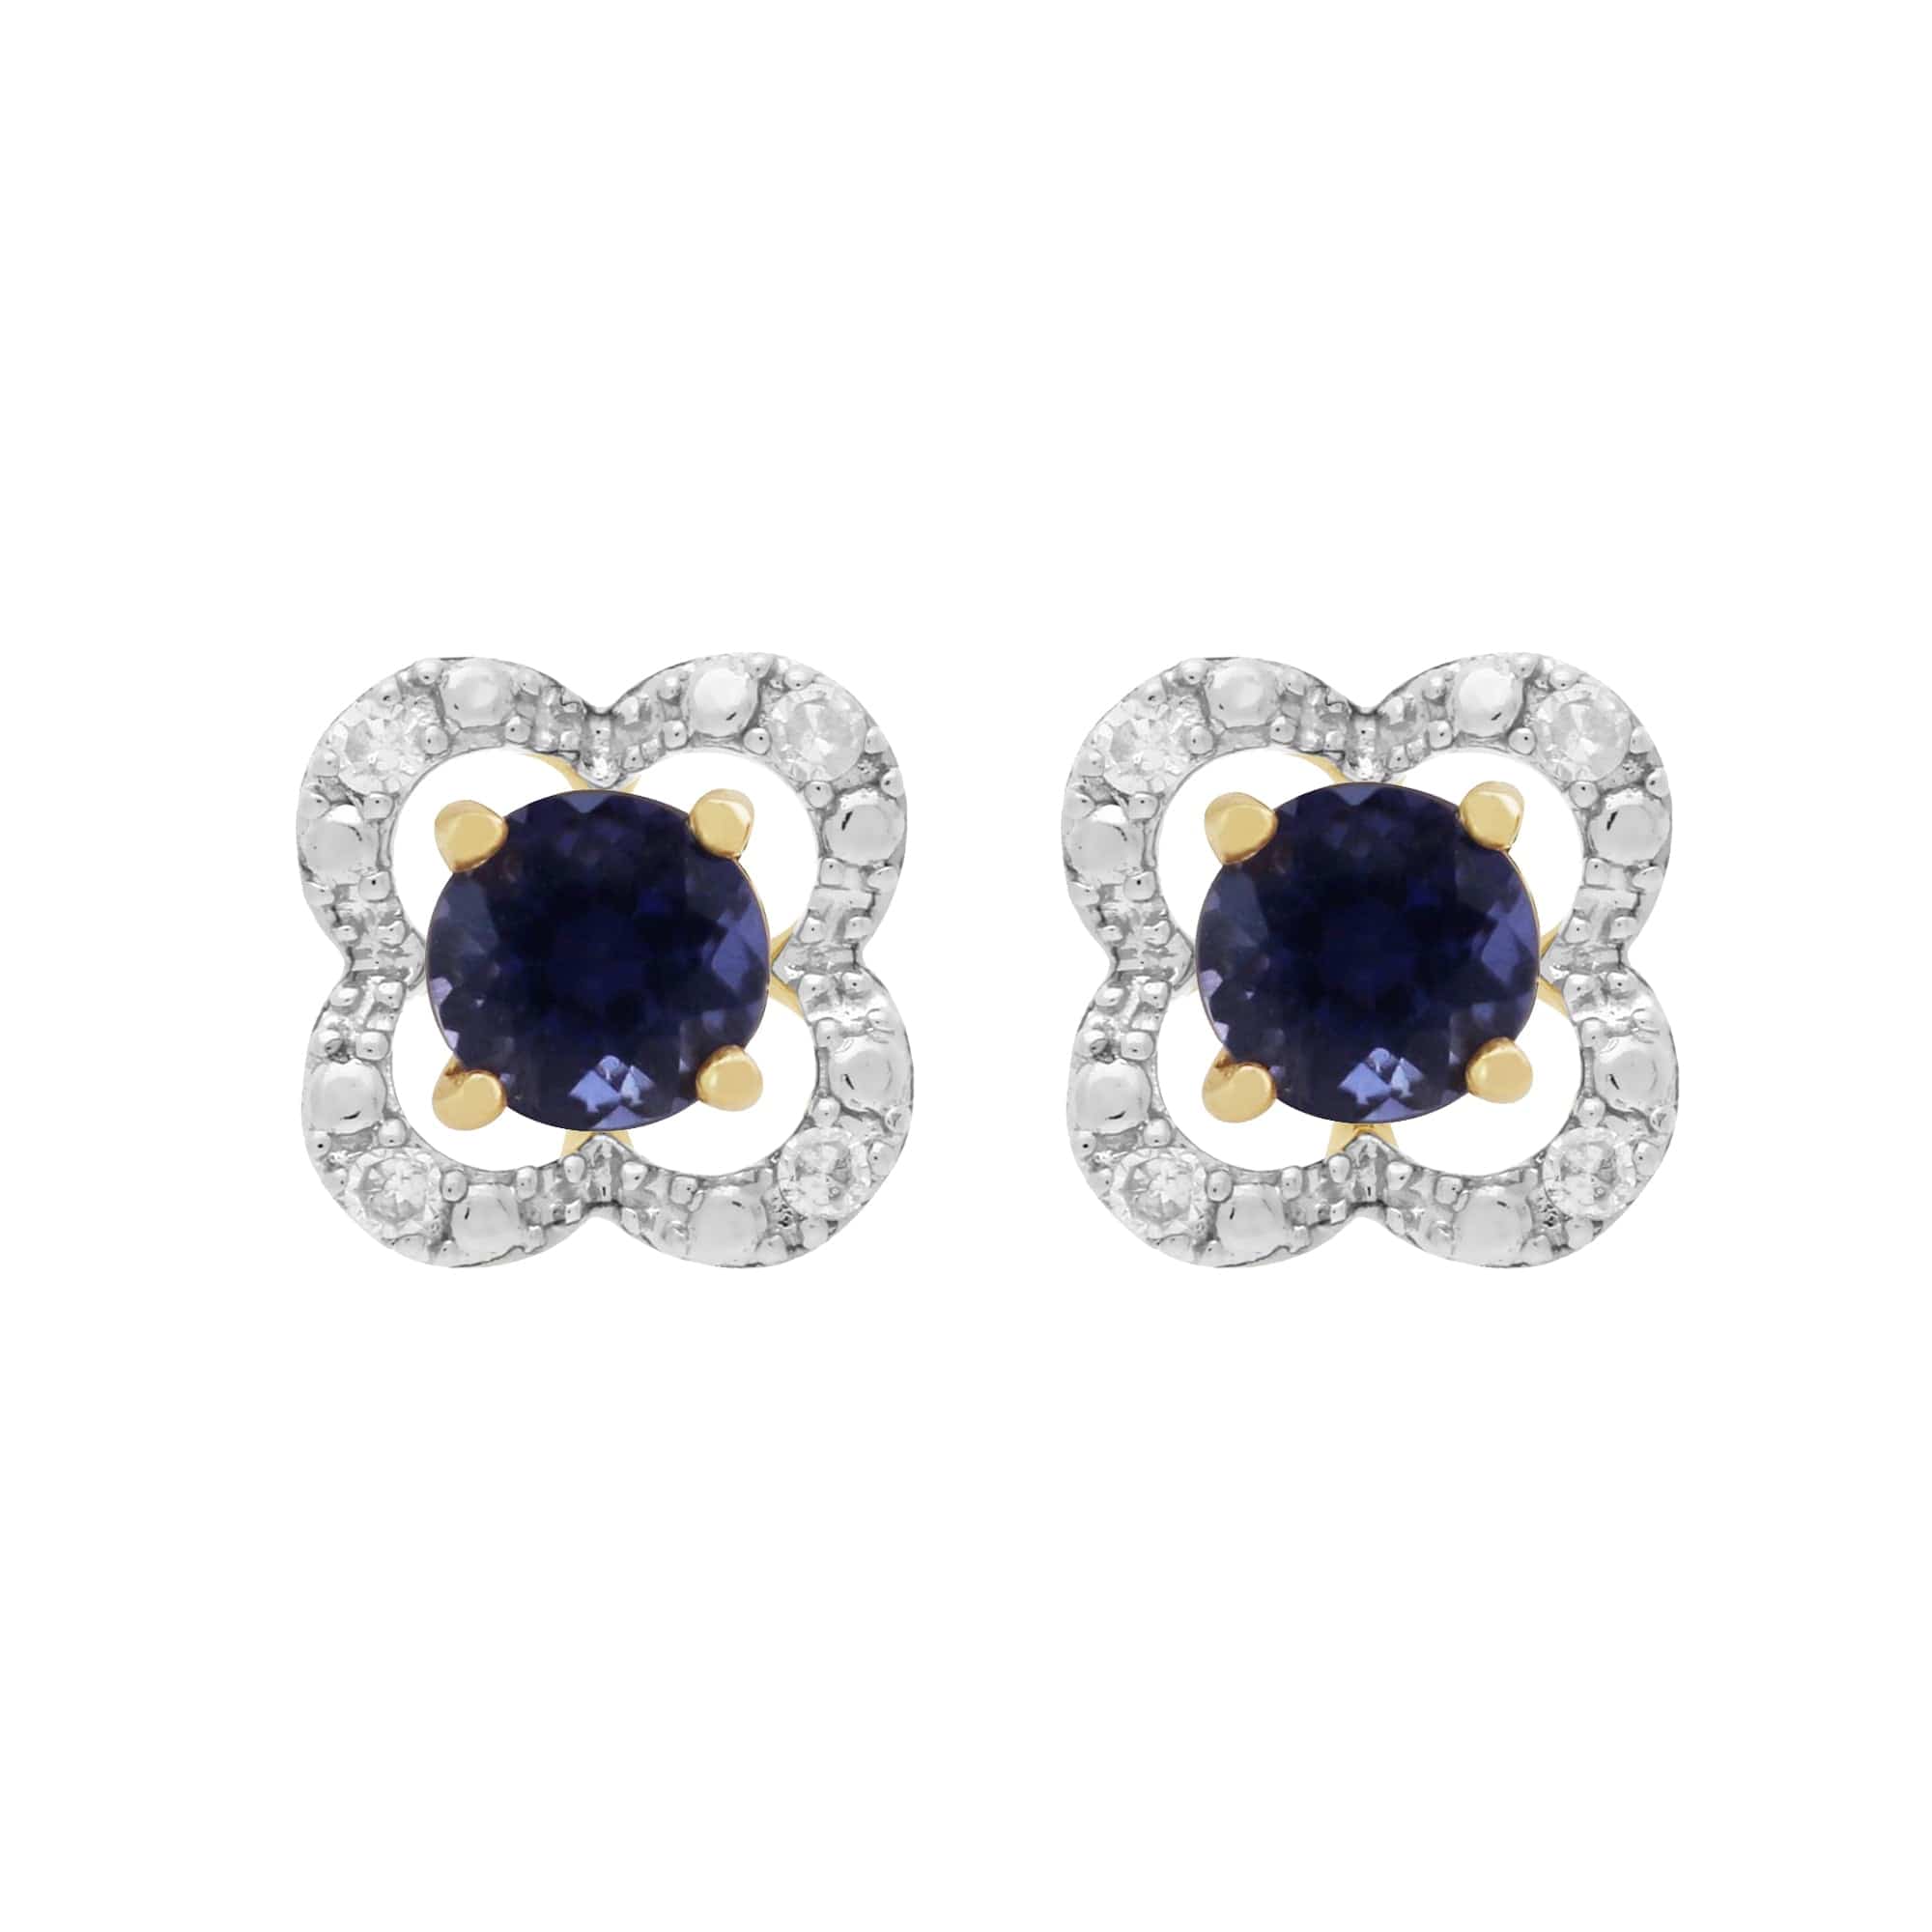 11556-191E0375019 Classic Round Iolite Stud Earrings with Detachable Diamond Floral Ear Jacket in 9ct Yellow Gold 1